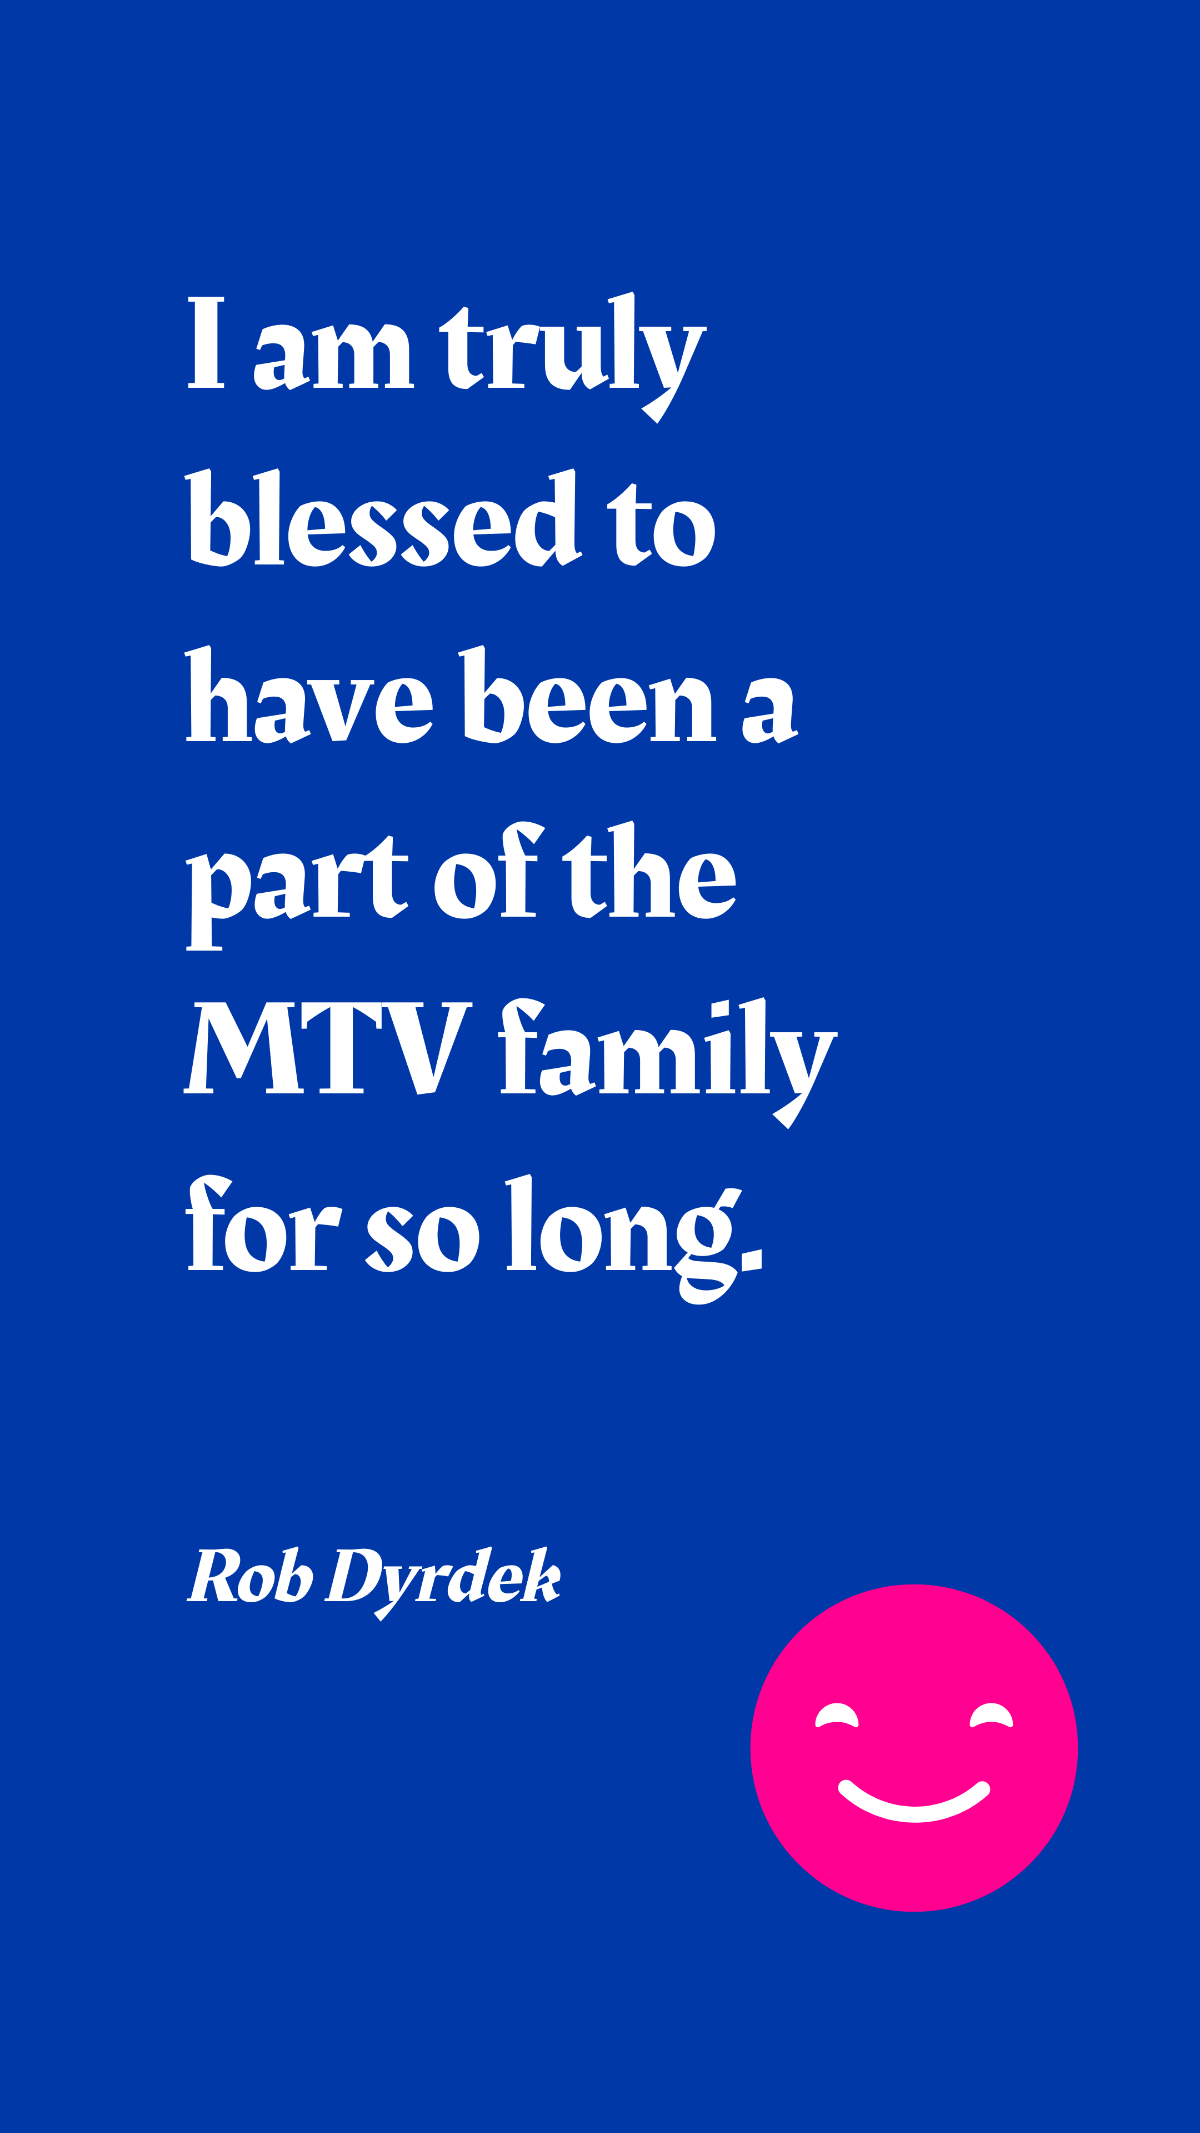 Rob Dyrdek - I am truly blessed to have been a part of the MTV family for so long. Template